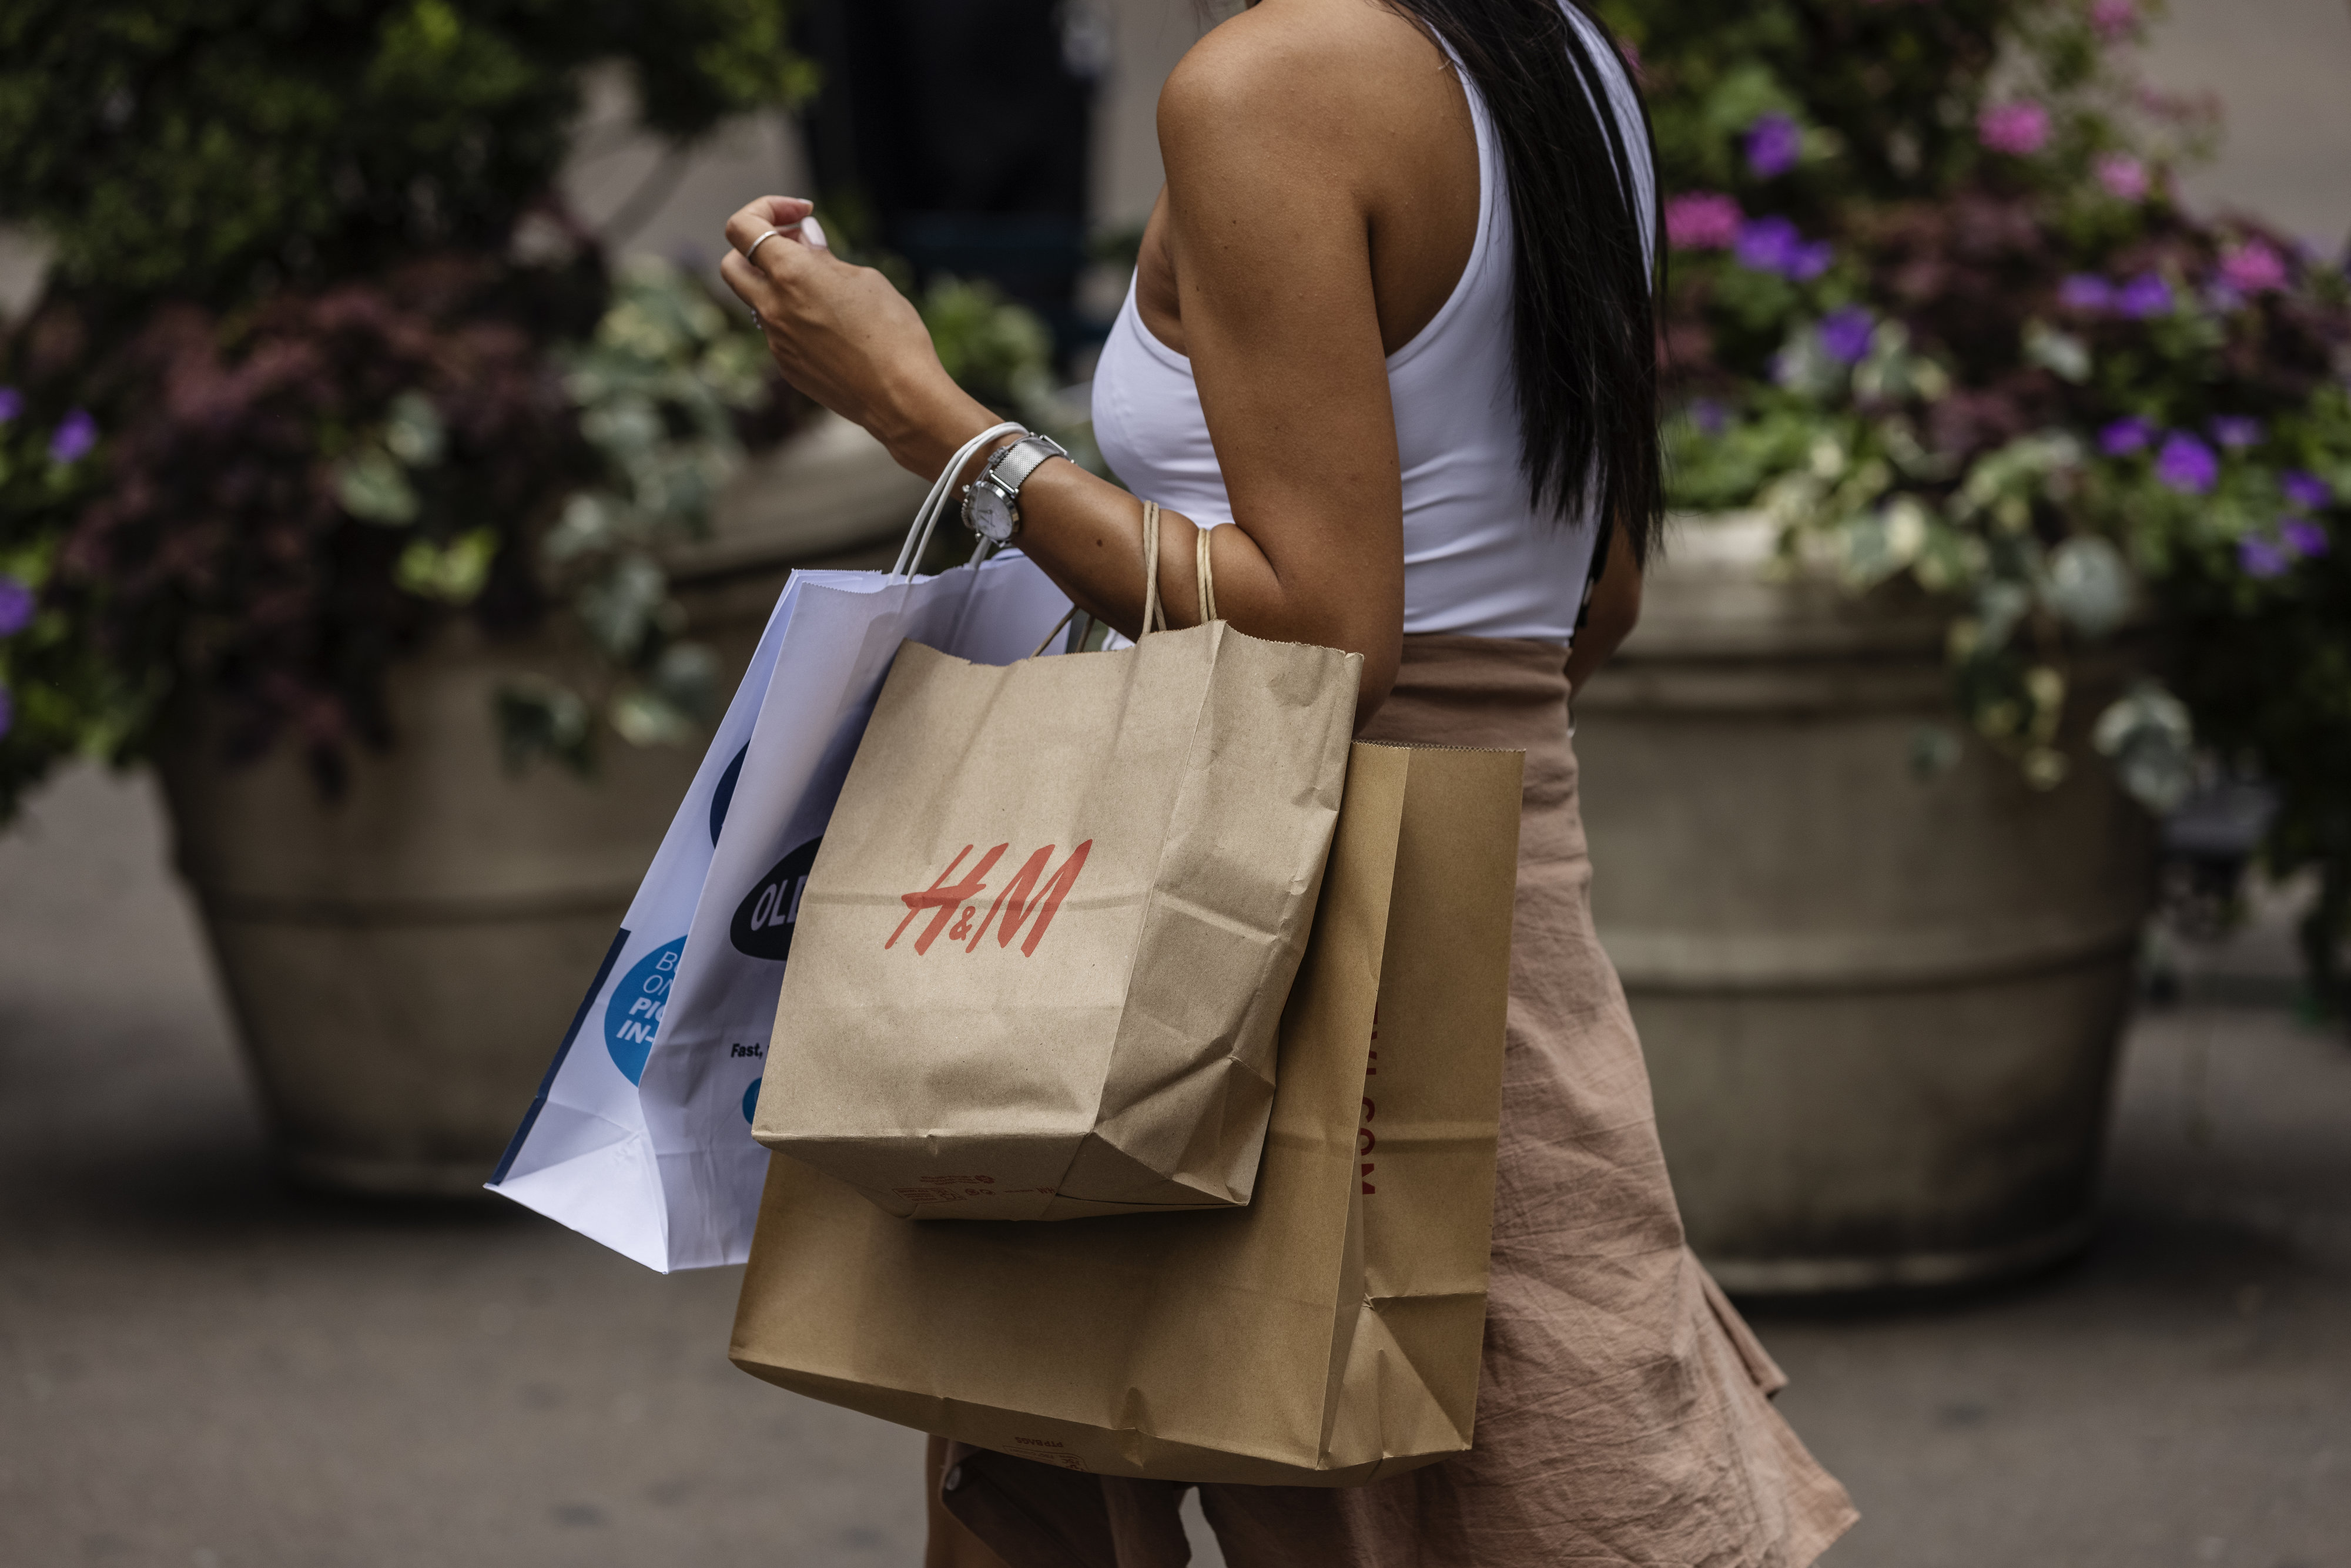 A shopper&nbsp;in New York on July 28. Consumer spending slowed to a 1% annualized growth rate from 1.8% for the first quarter.